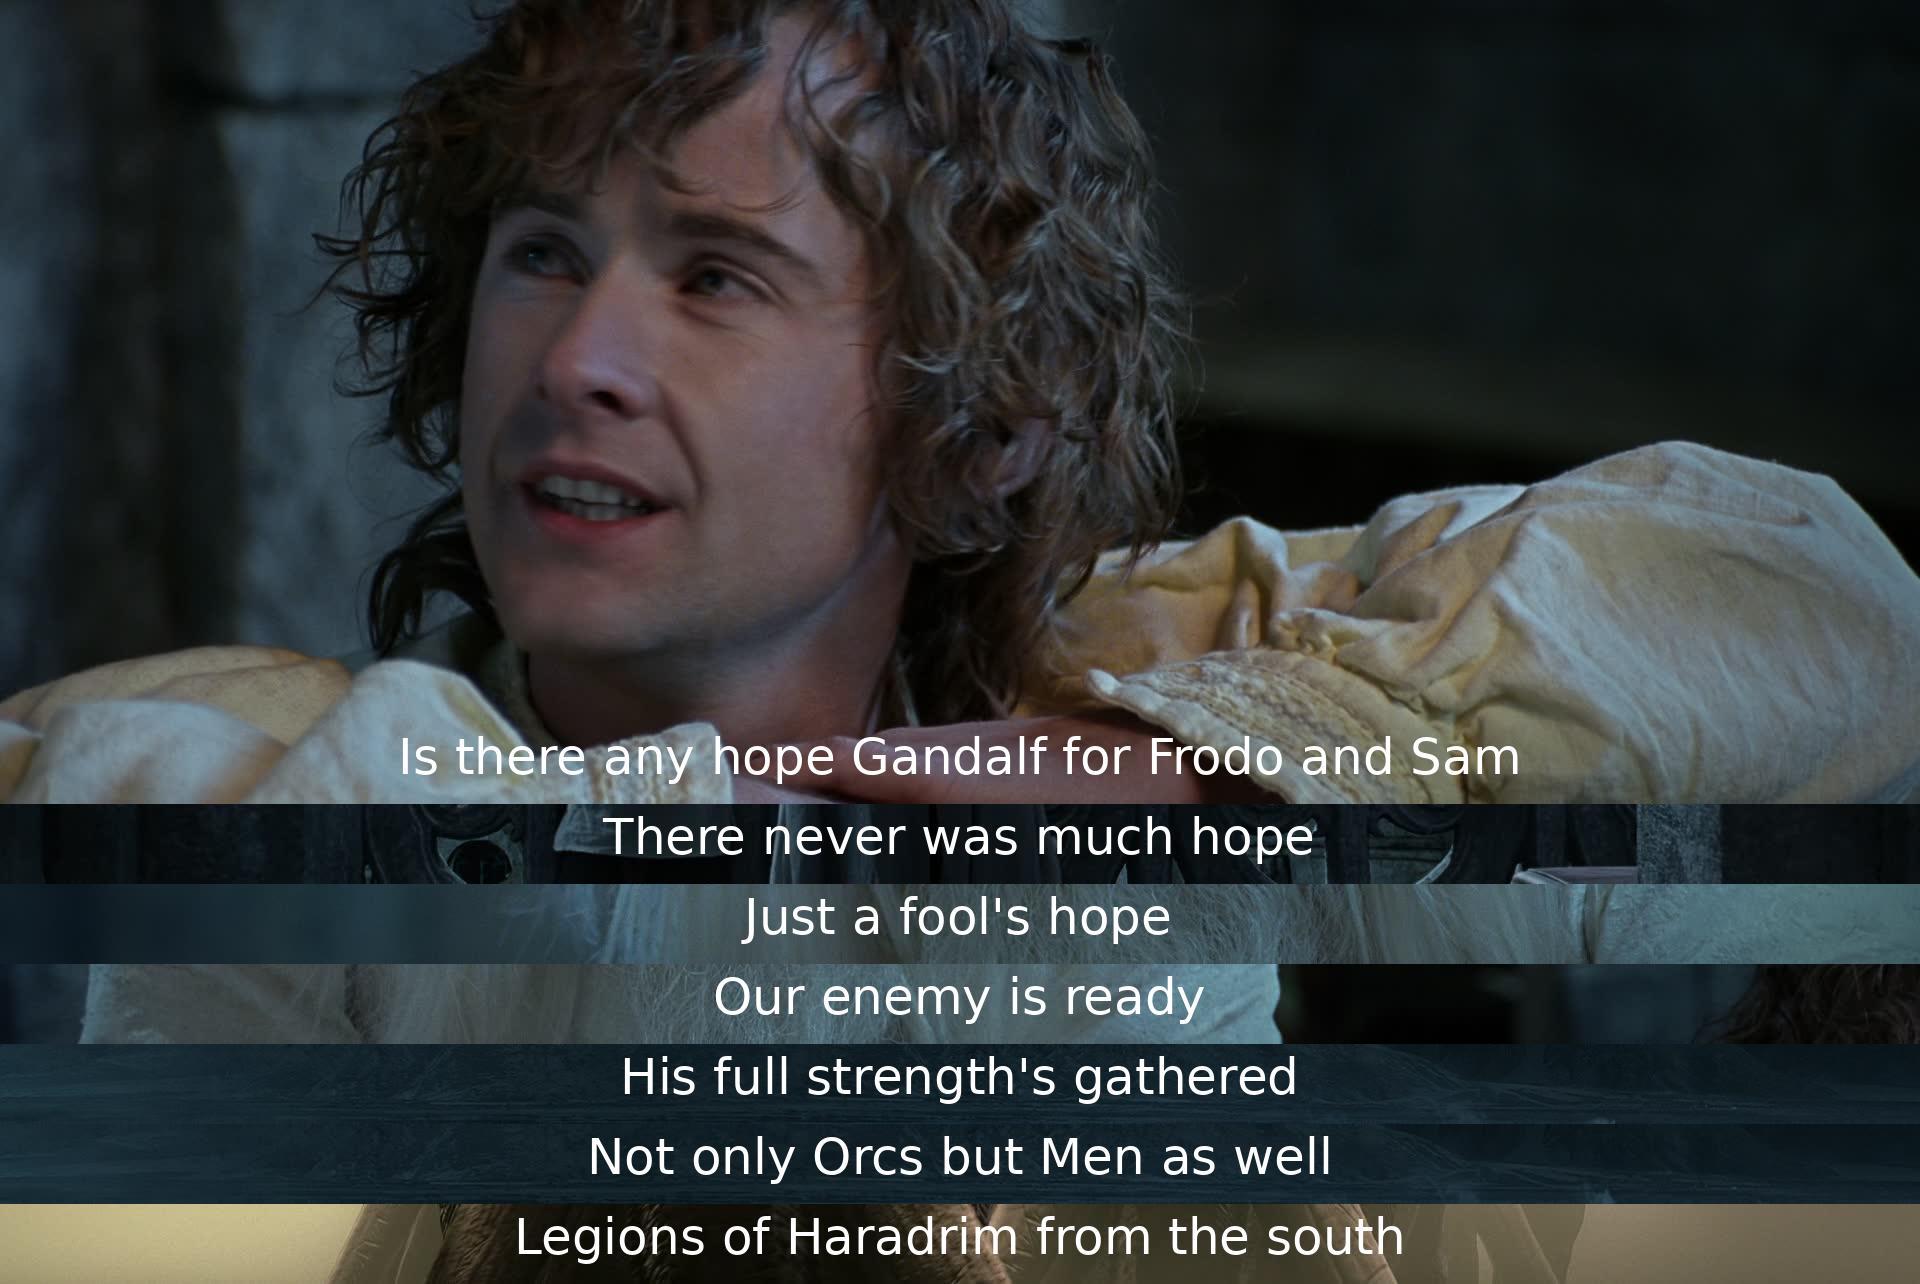 Gandalf admits to the bleak situation, acknowledging the lack of hope for Frodo and Sam's quest. The enemy is powerful and prepared, with Orcs, Men, and Haradrim united against them, indicating the formidable challenges ahead.